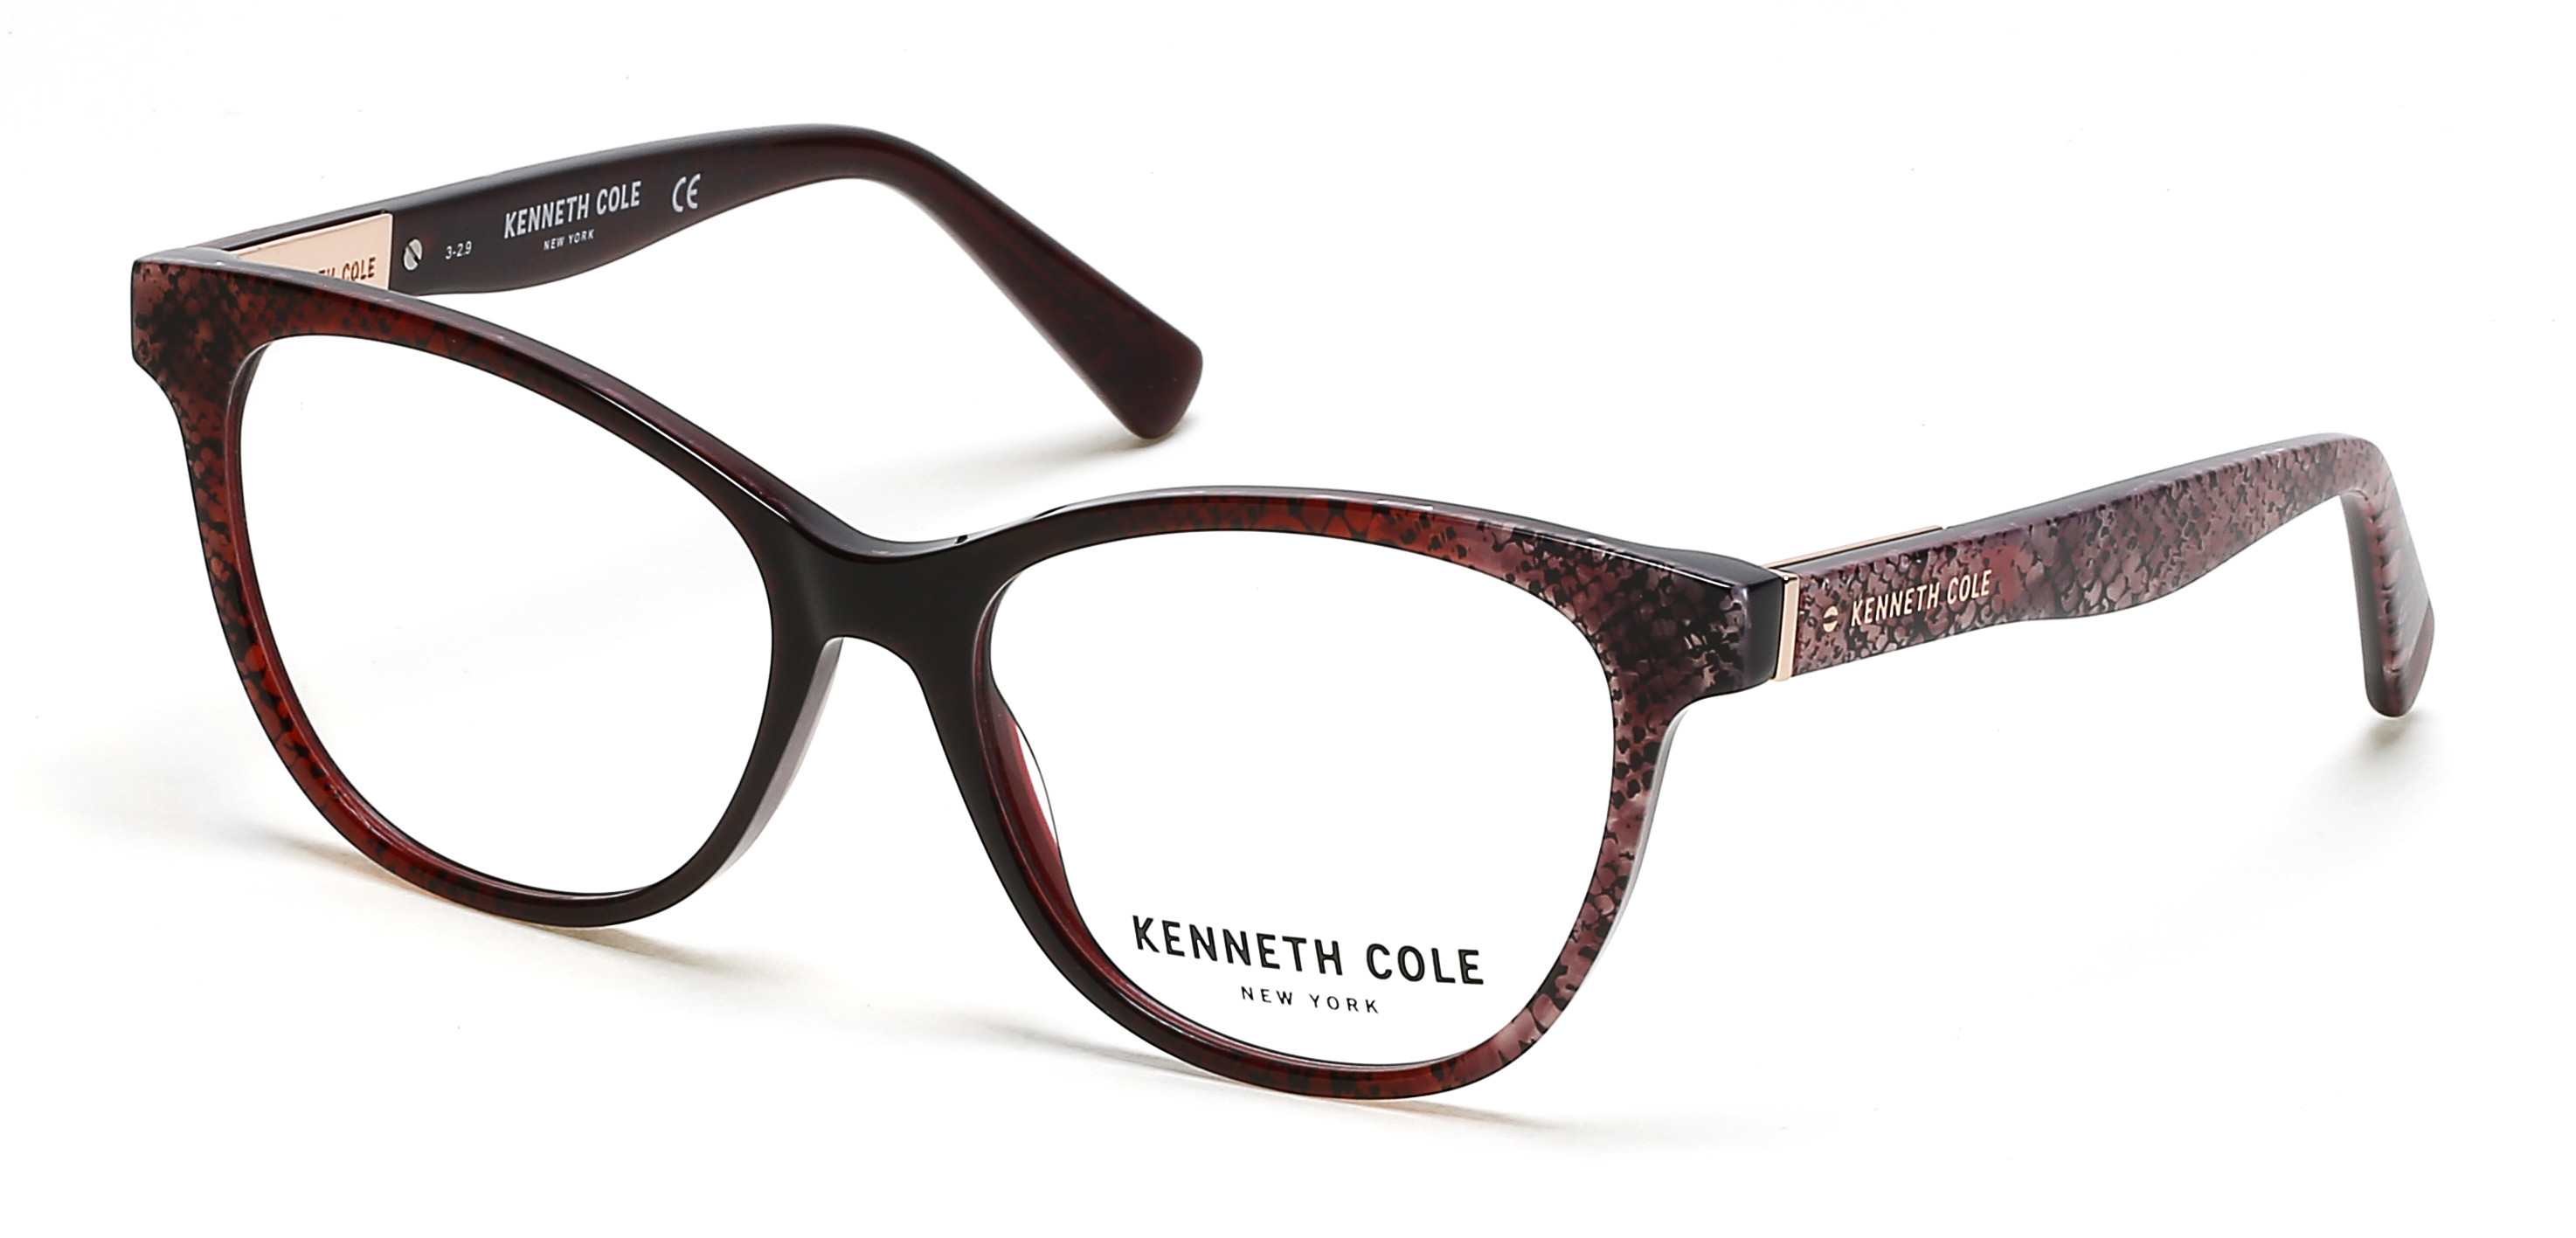 KENNETH COLE NY 0316 069